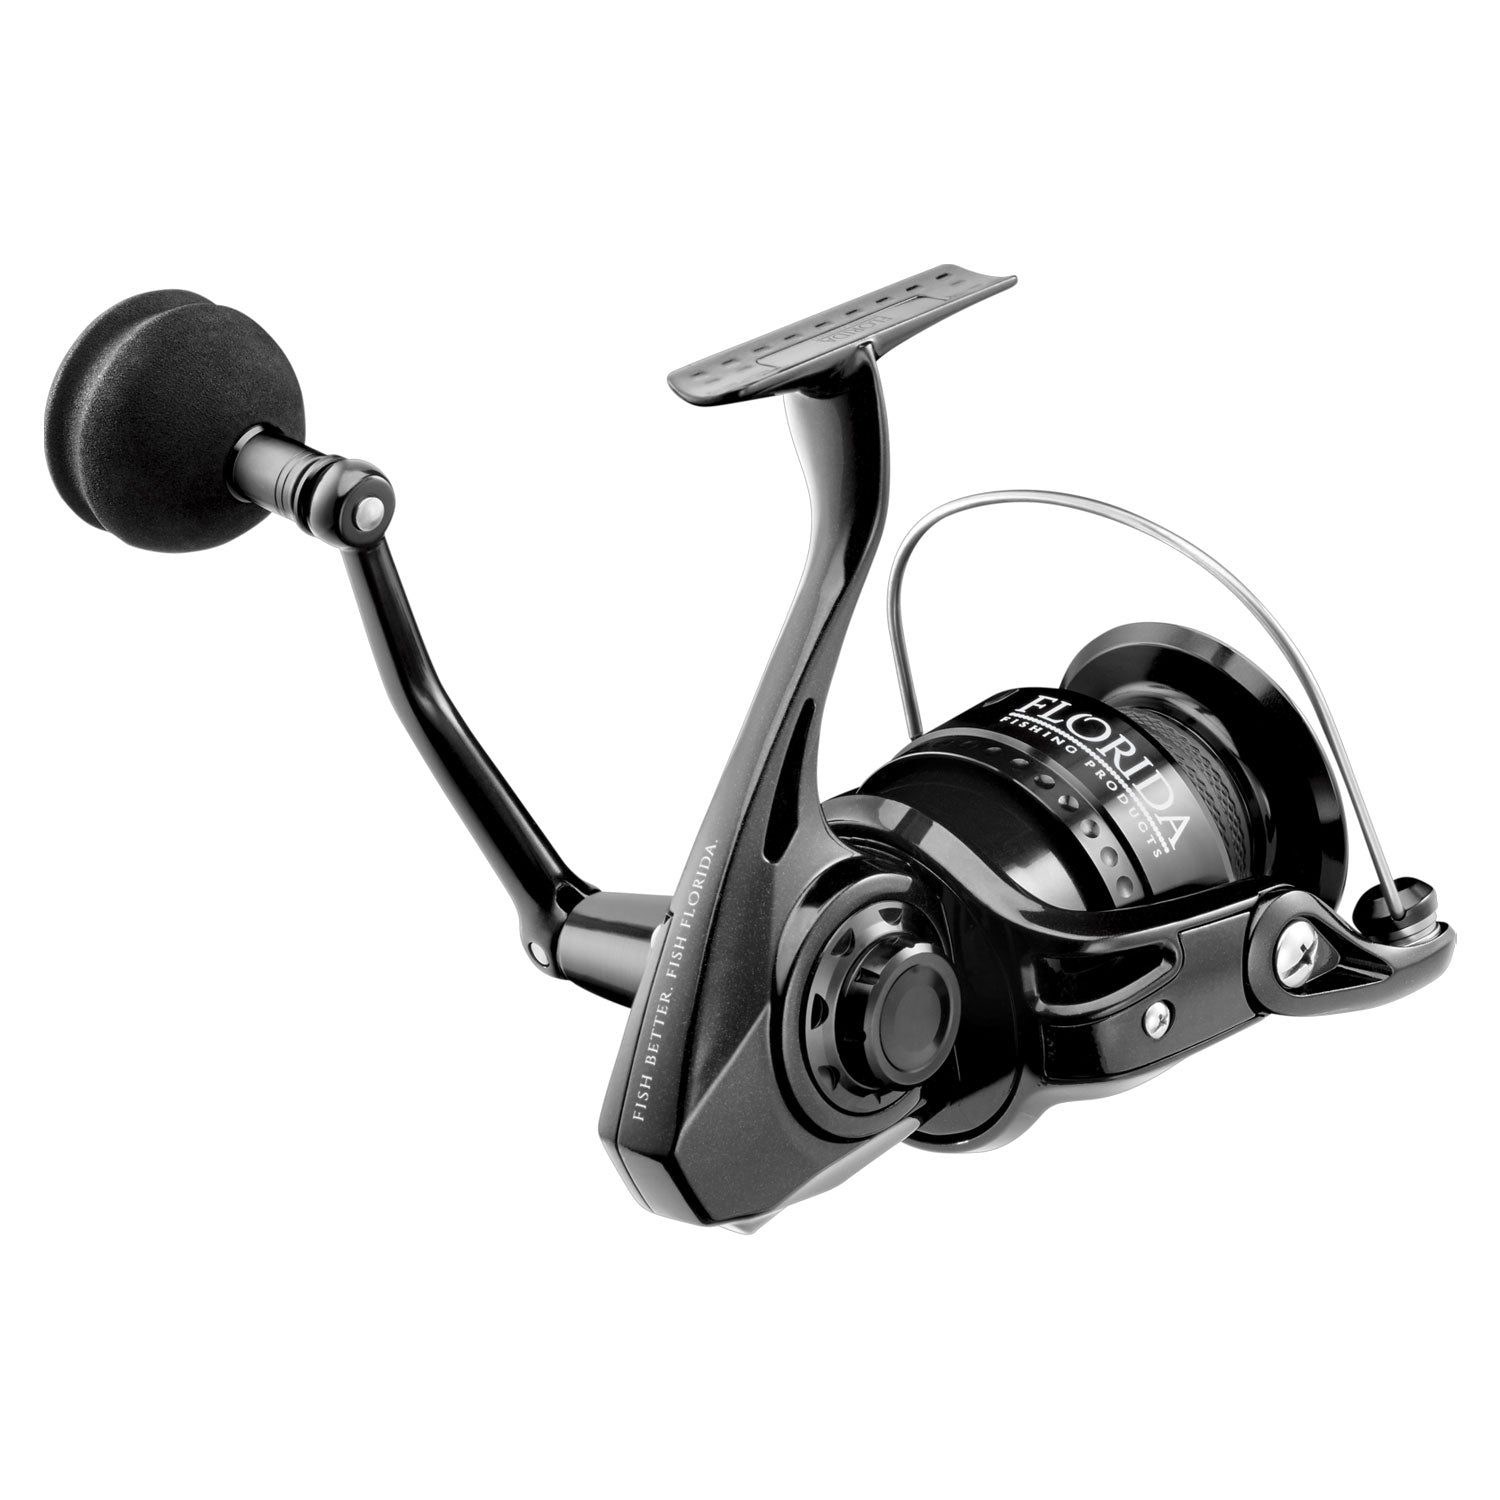 Florida Fishing Products Osprey SS Spinning Reel 5000 - Andy